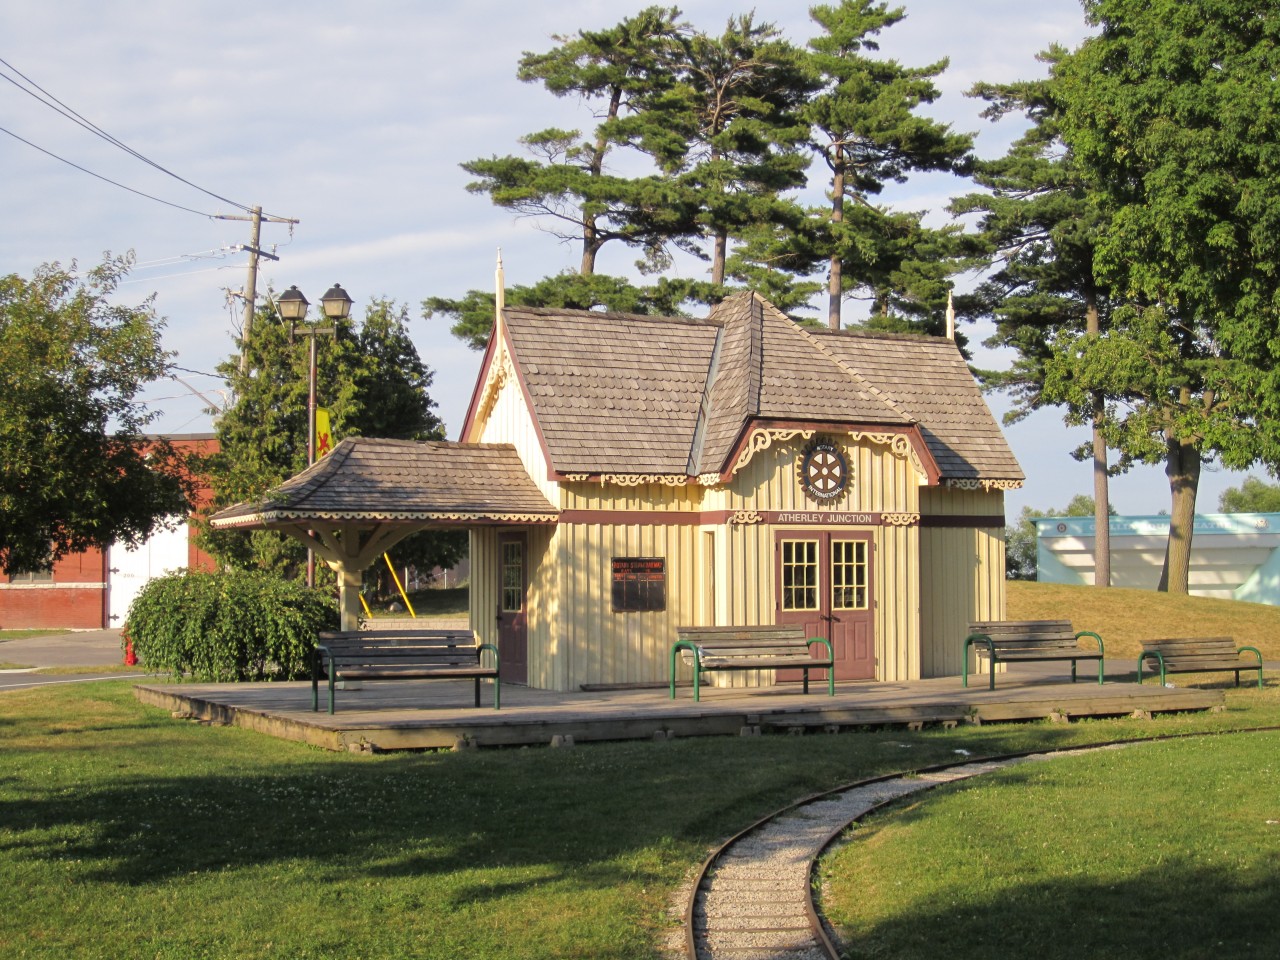 This replica of the Atherley Junction station serves the Rotary club train ride in Couchiching Beach Park.